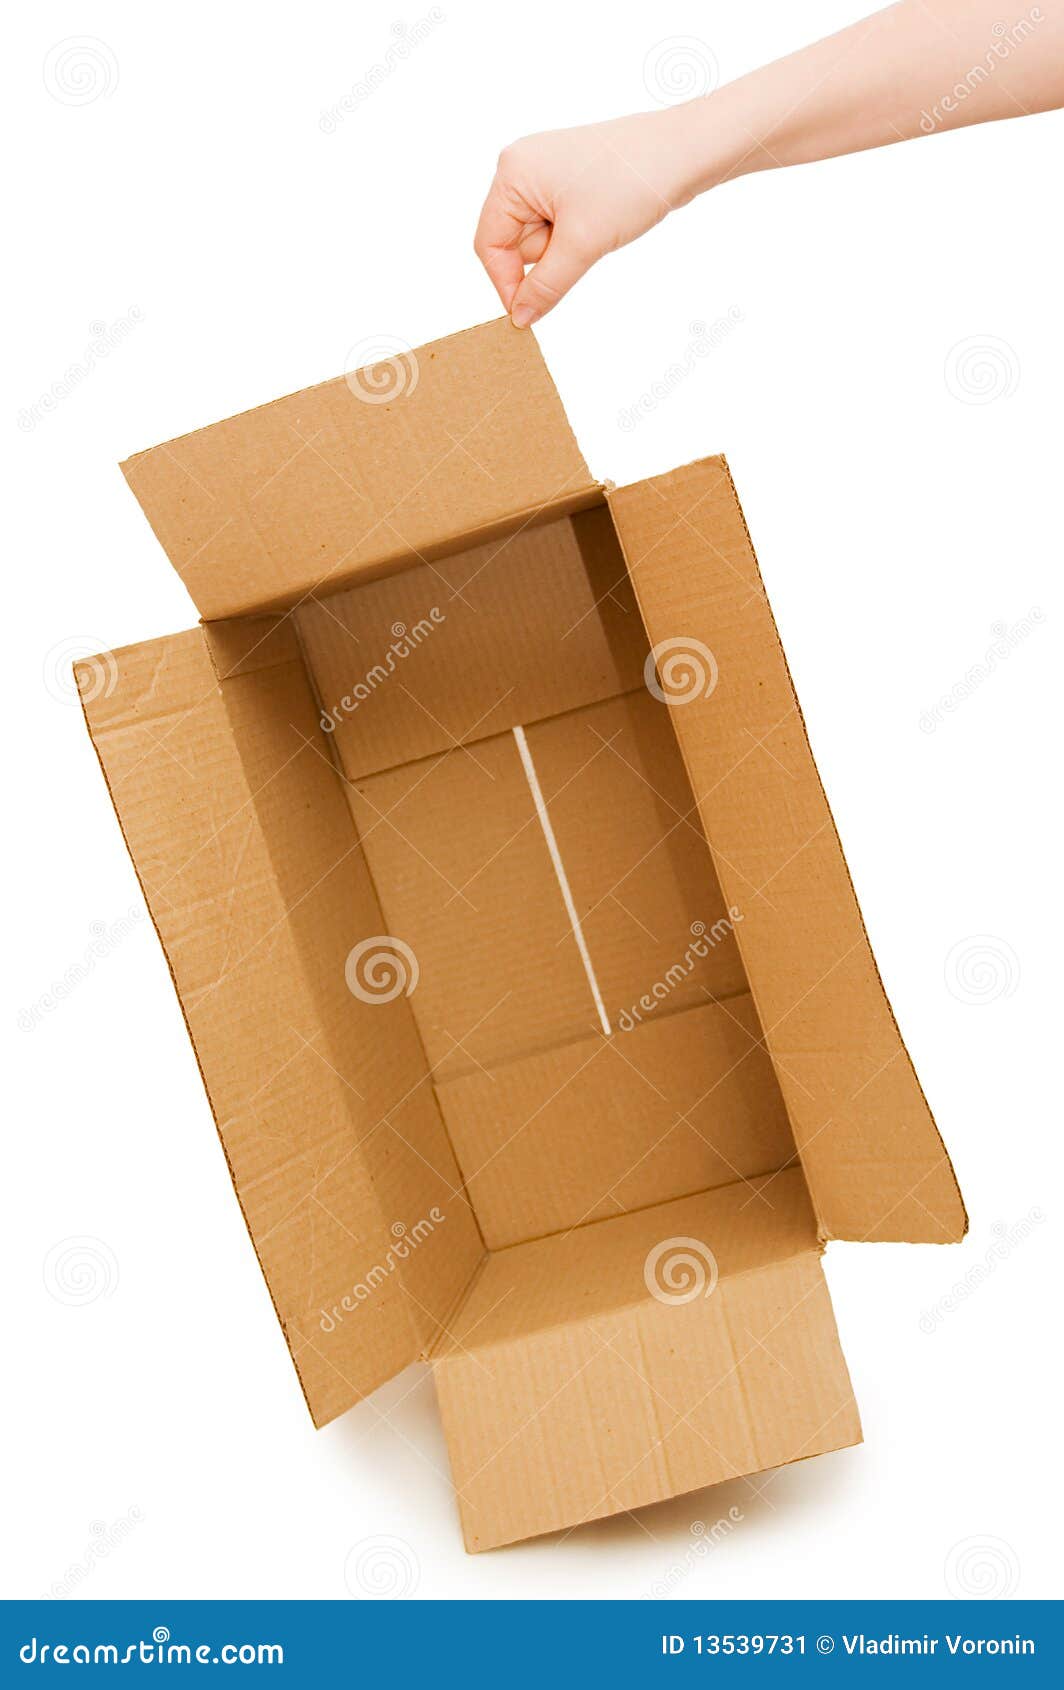 Download 319 Hands Open Cardboard Box Isolated Photos Free Royalty Free Stock Photos From Dreamstime Yellowimages Mockups